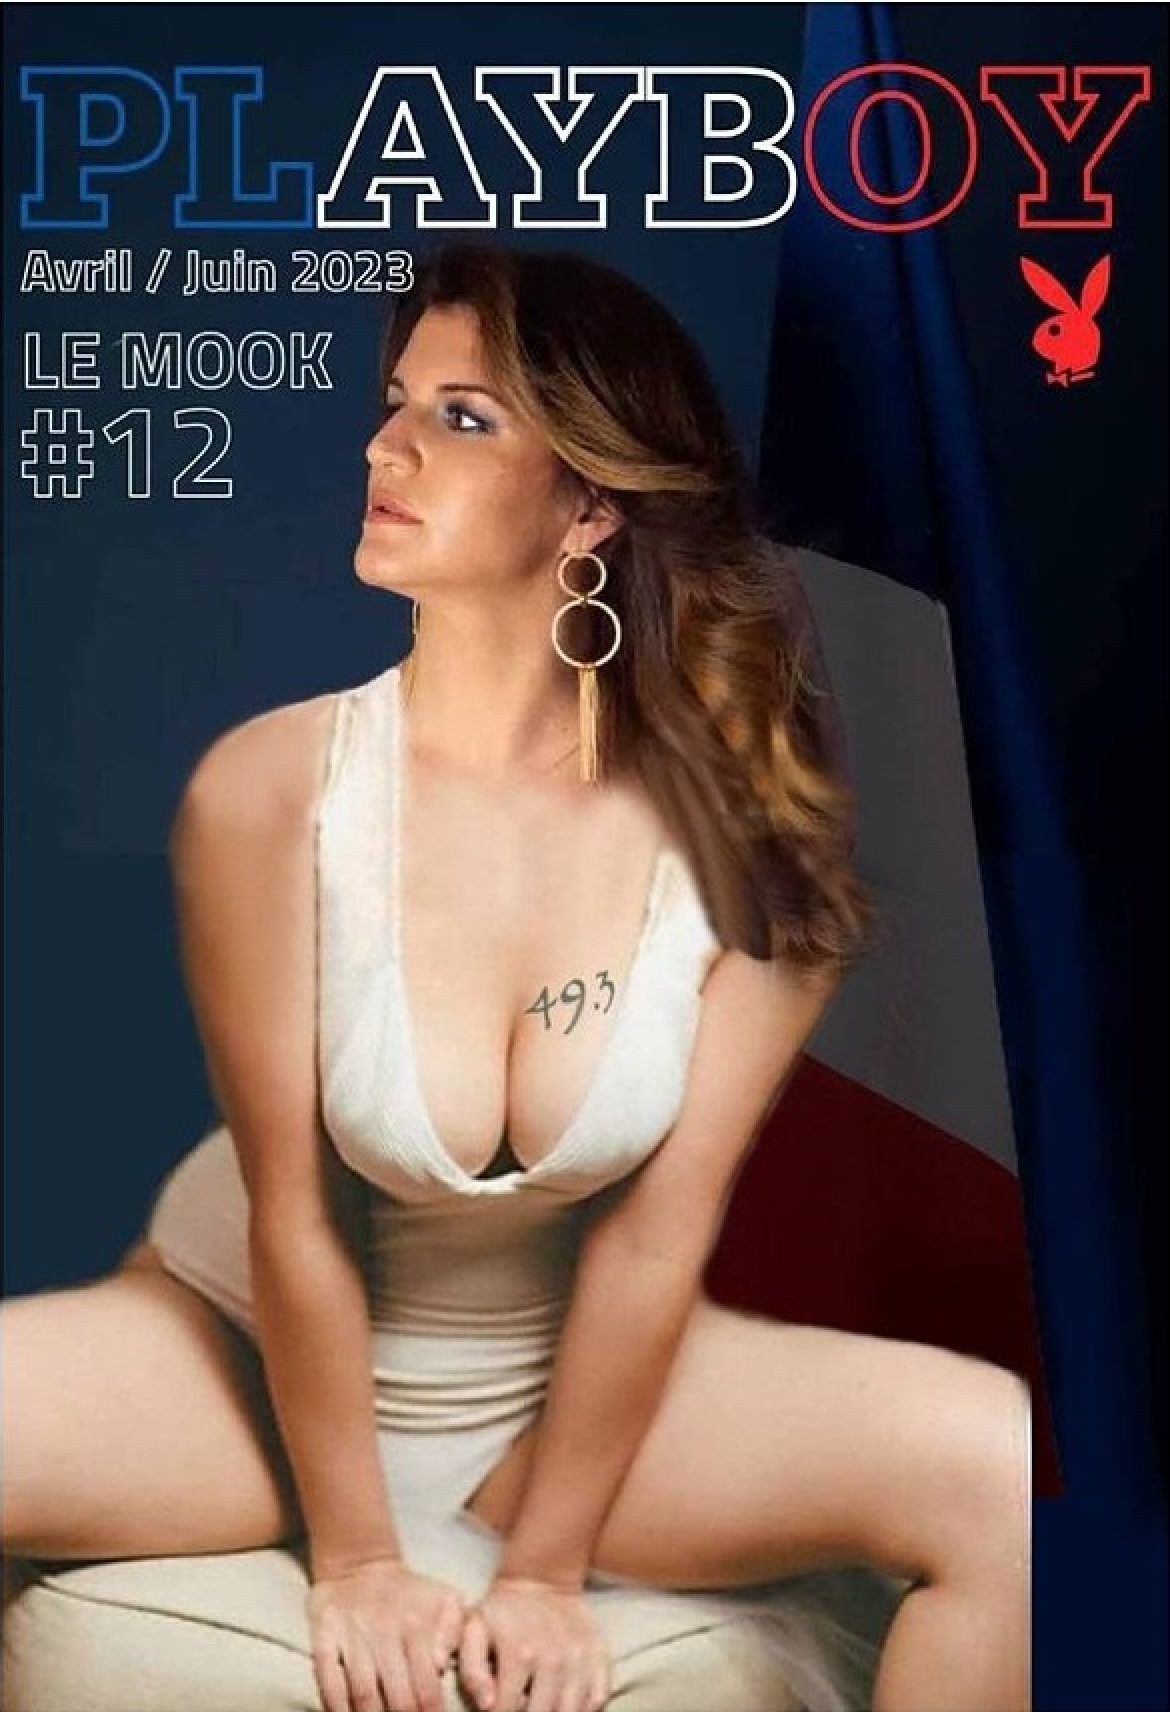 French minister in Playboy shoot says women have right to pose nude if they wanted to South China Morning Post photo pic